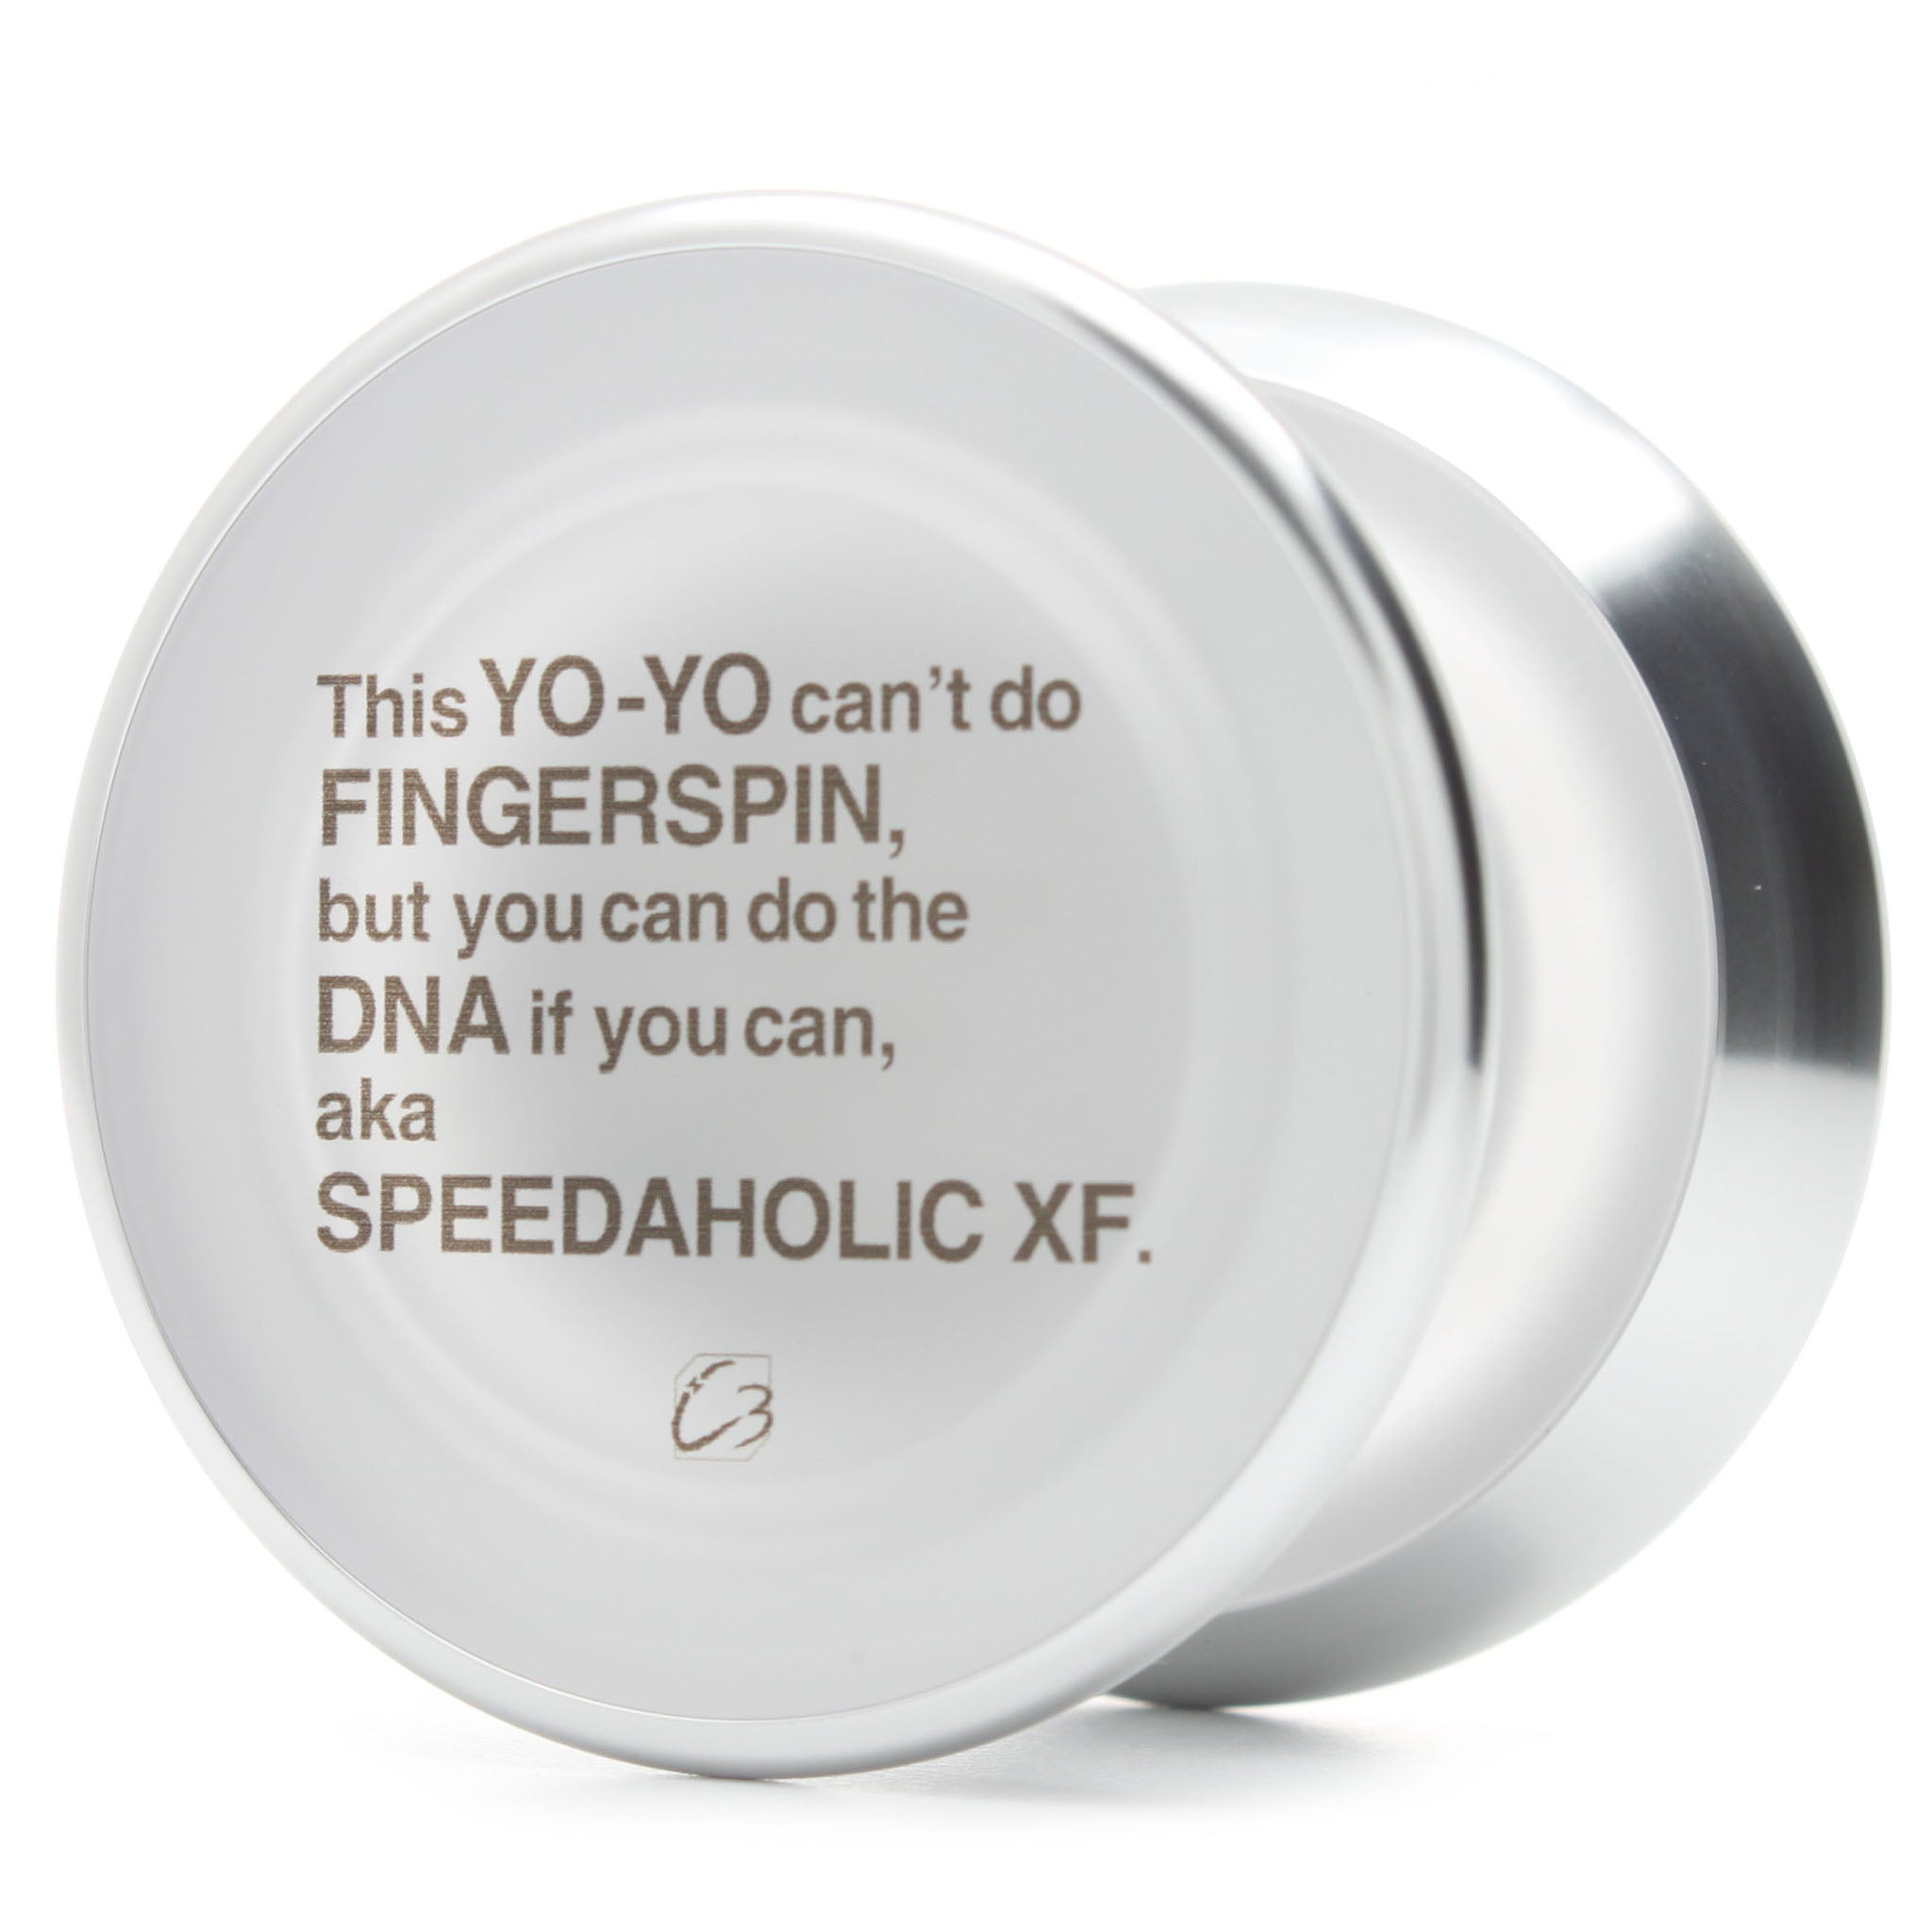 THIS YOYO CAN’T DO FINGERSPIN, BUT YOU CAN DO DNA IF YOU CAN. aka スピーダホリックXF